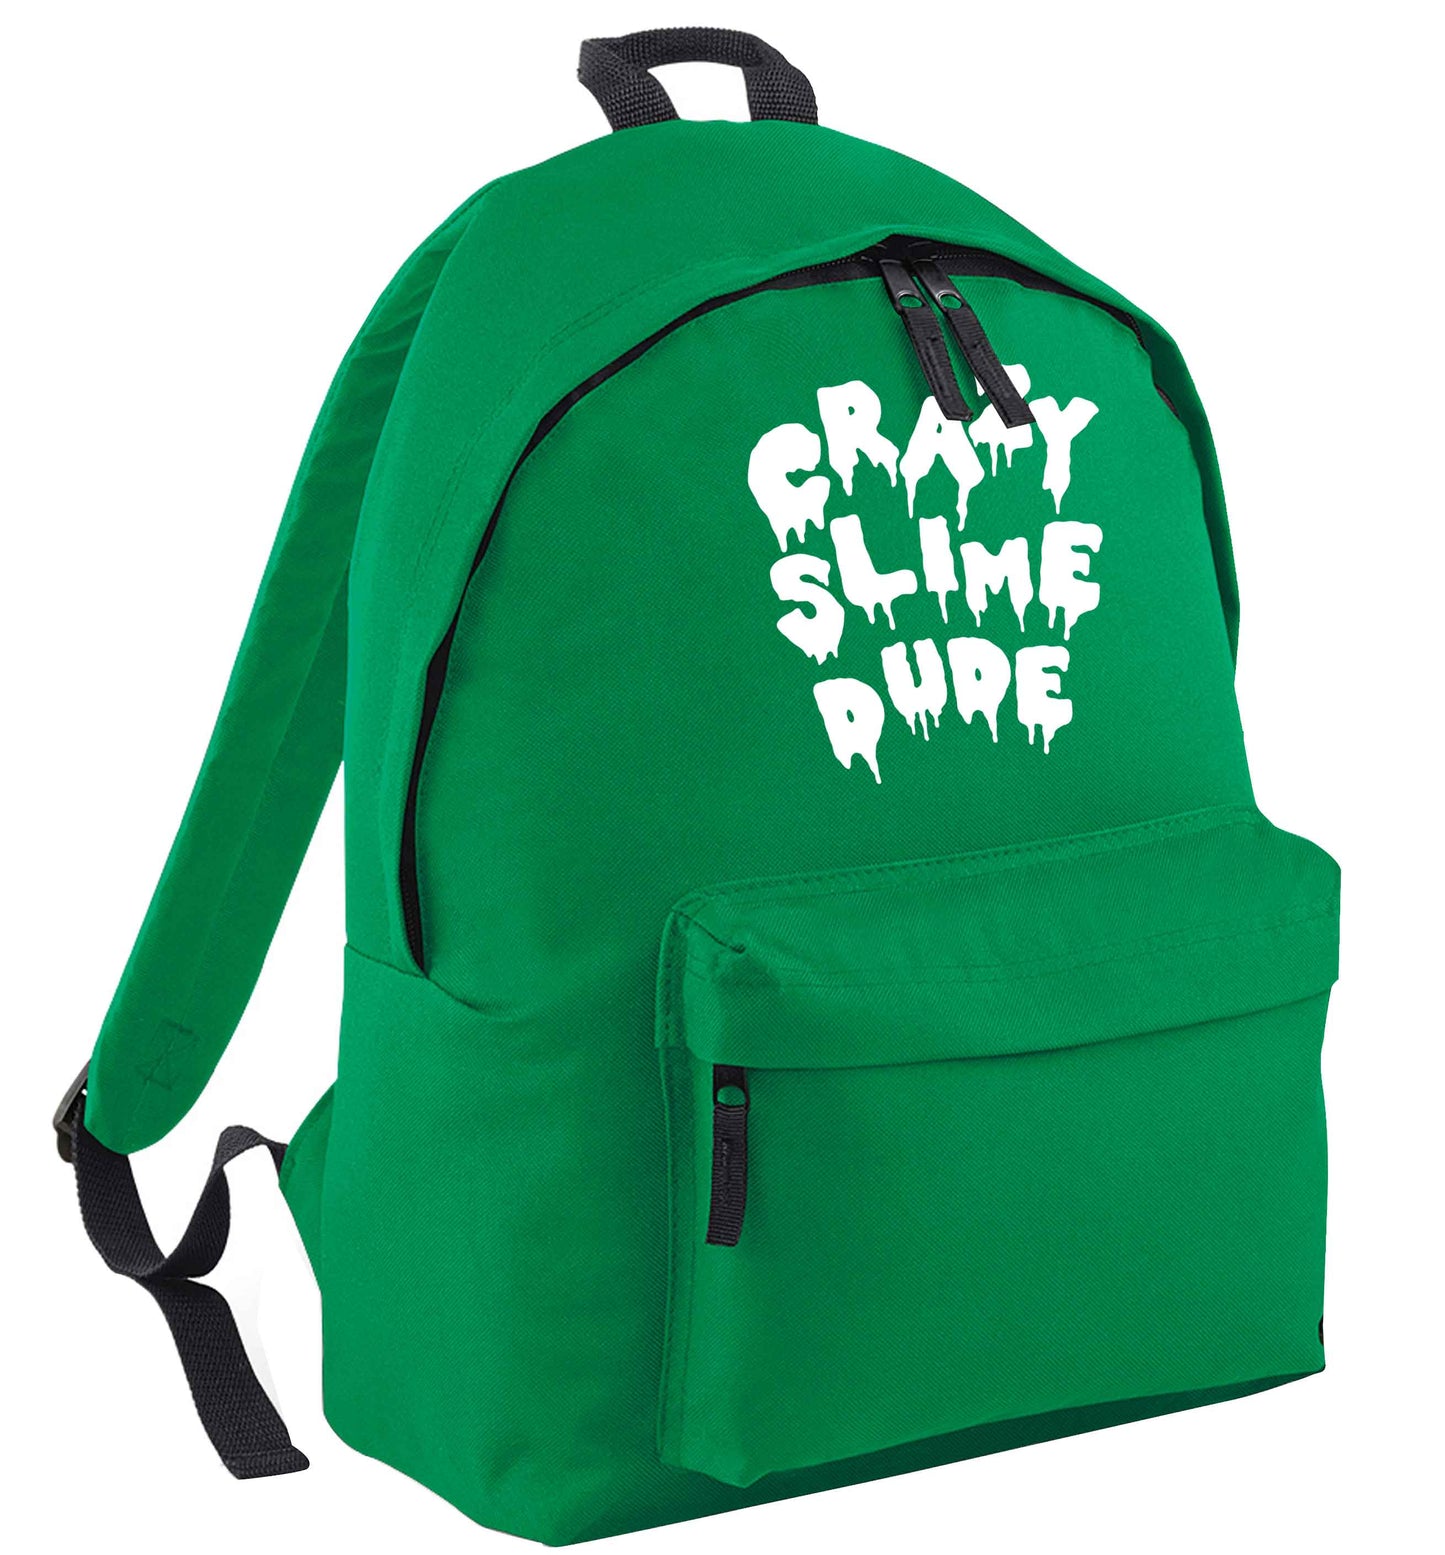 Crazy slime dude green adults backpack